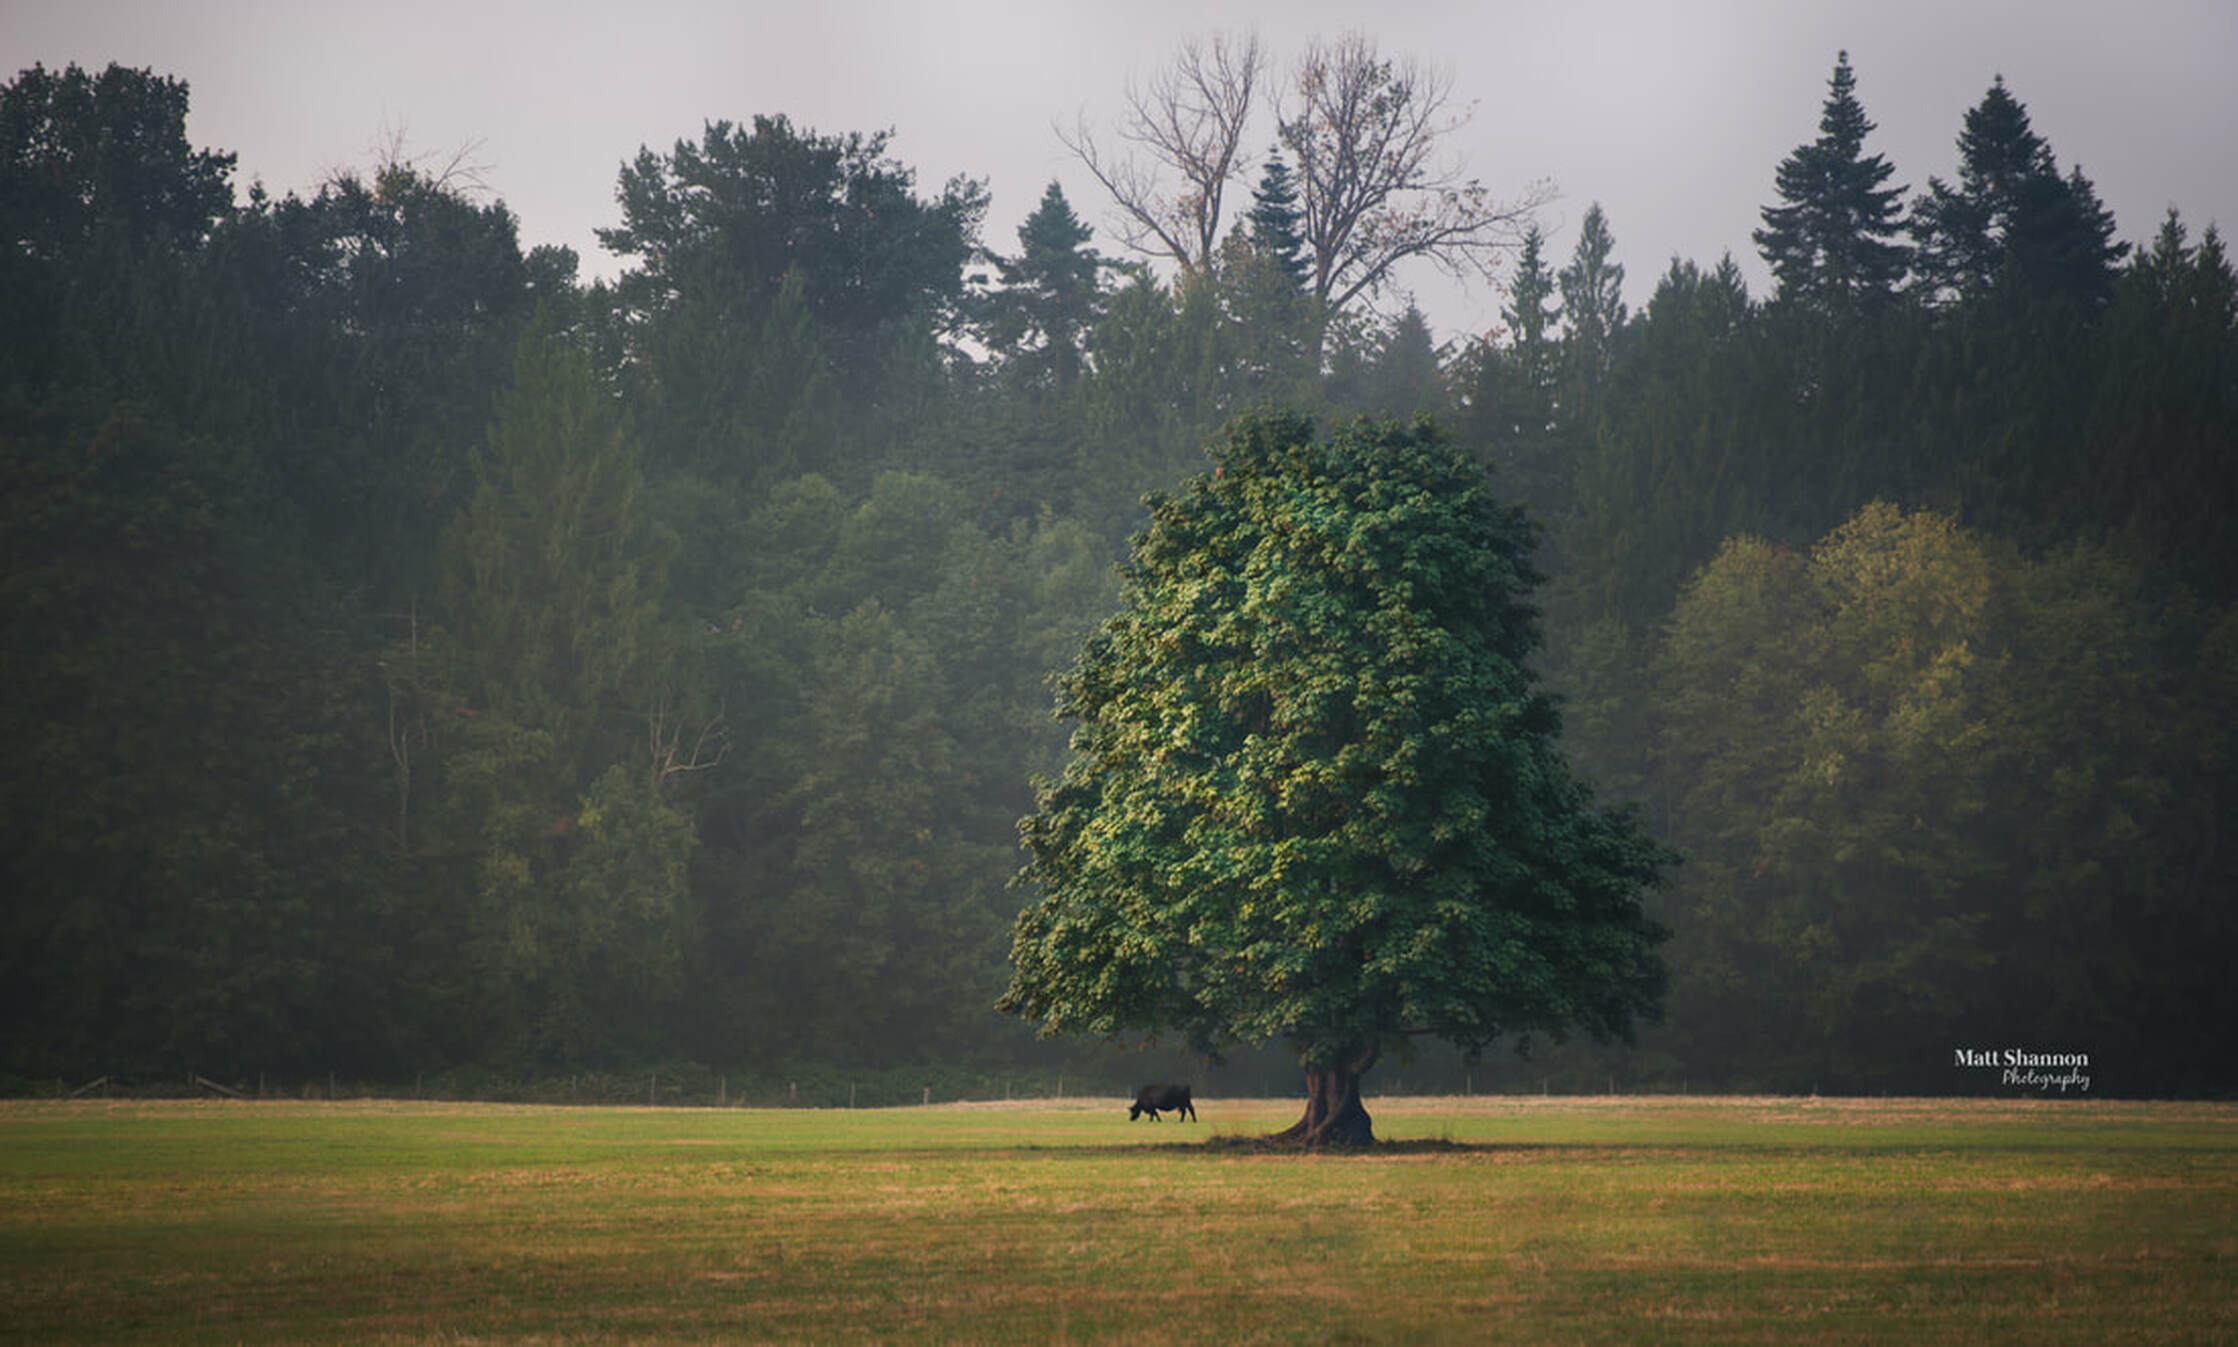 tree, lonely tree, trekwest, matt shannon photography, landscape, field, farmer, famers field, hay, morning, vancouver island, cow, cattle, animal, pasture, live stock, one tree, forrest, leaves, Picture